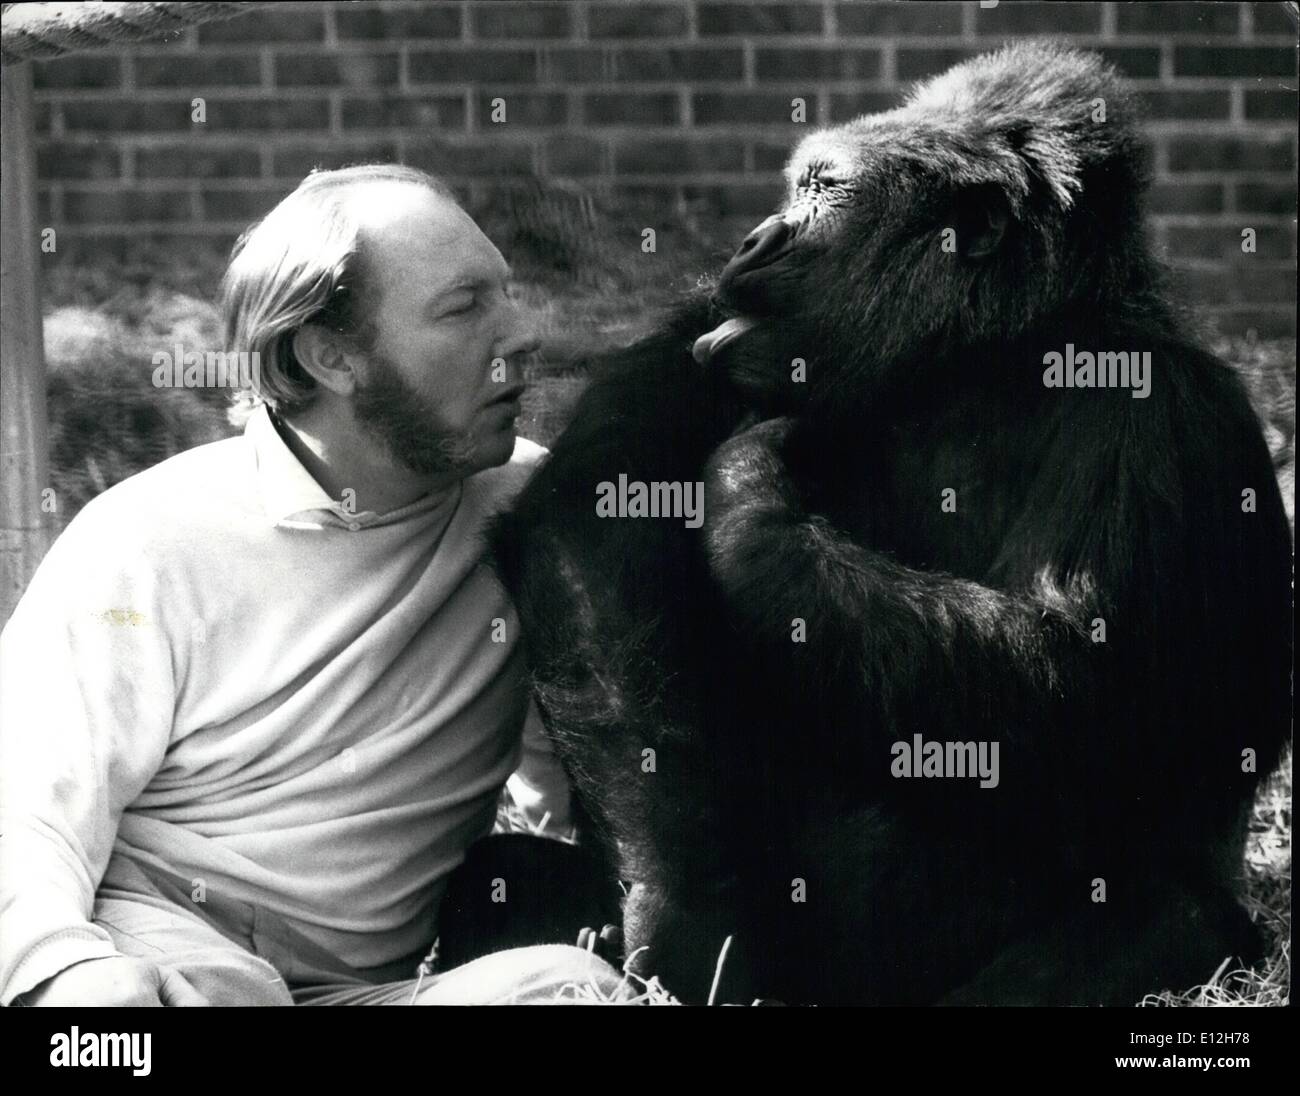 Jan. 10, 2012 - Caught by the camera sticking out his tongue, a large gorilla, pictured with master John Spinall in his private zoo near Canterbury. Stock Photo